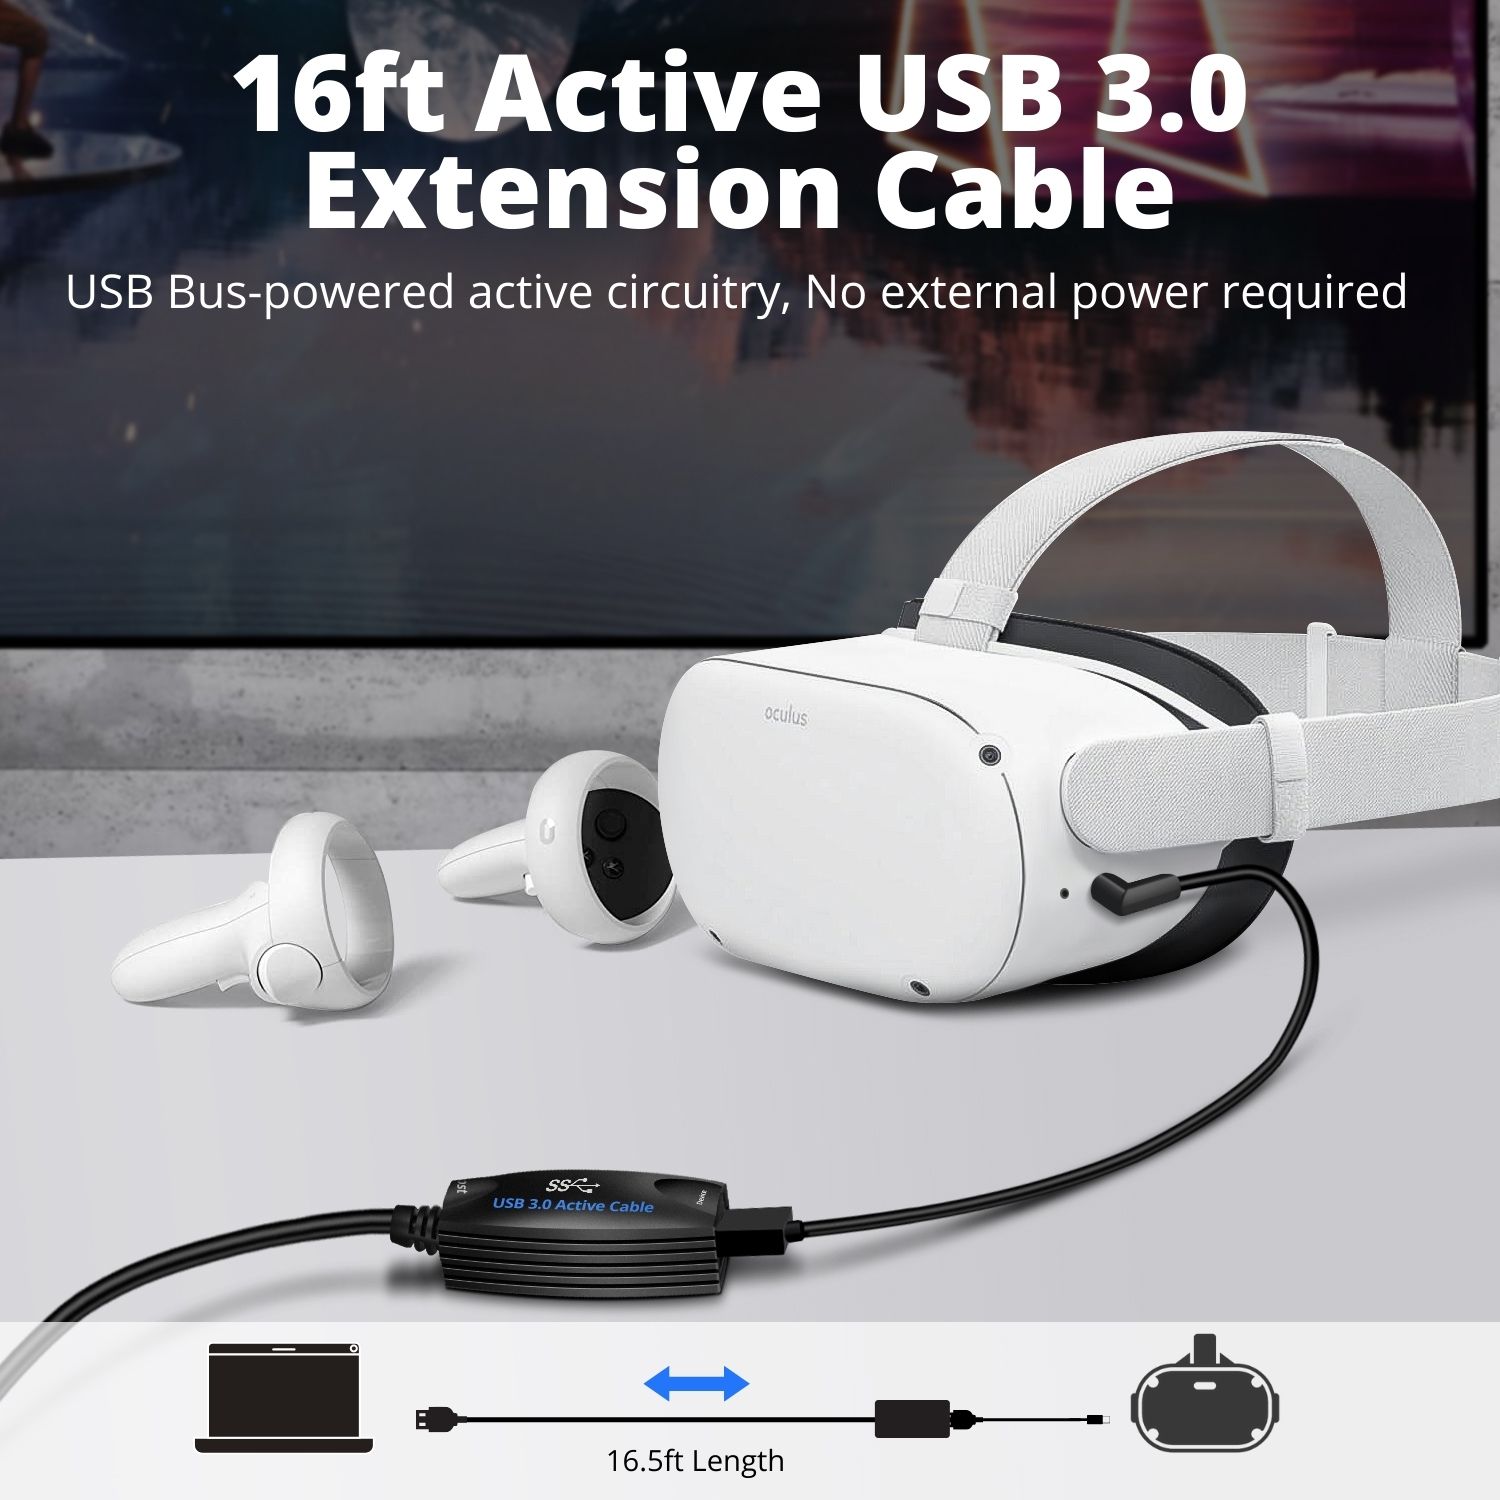 Extends & Protects Ports - With this long usb extension cable, users can easily connect USB disk or other USB peripherals to ports on the back of the TV, monitors, PCs; While protecting the USB sockets on your expensive devices and appliances from repeatedly pluging and unpluging